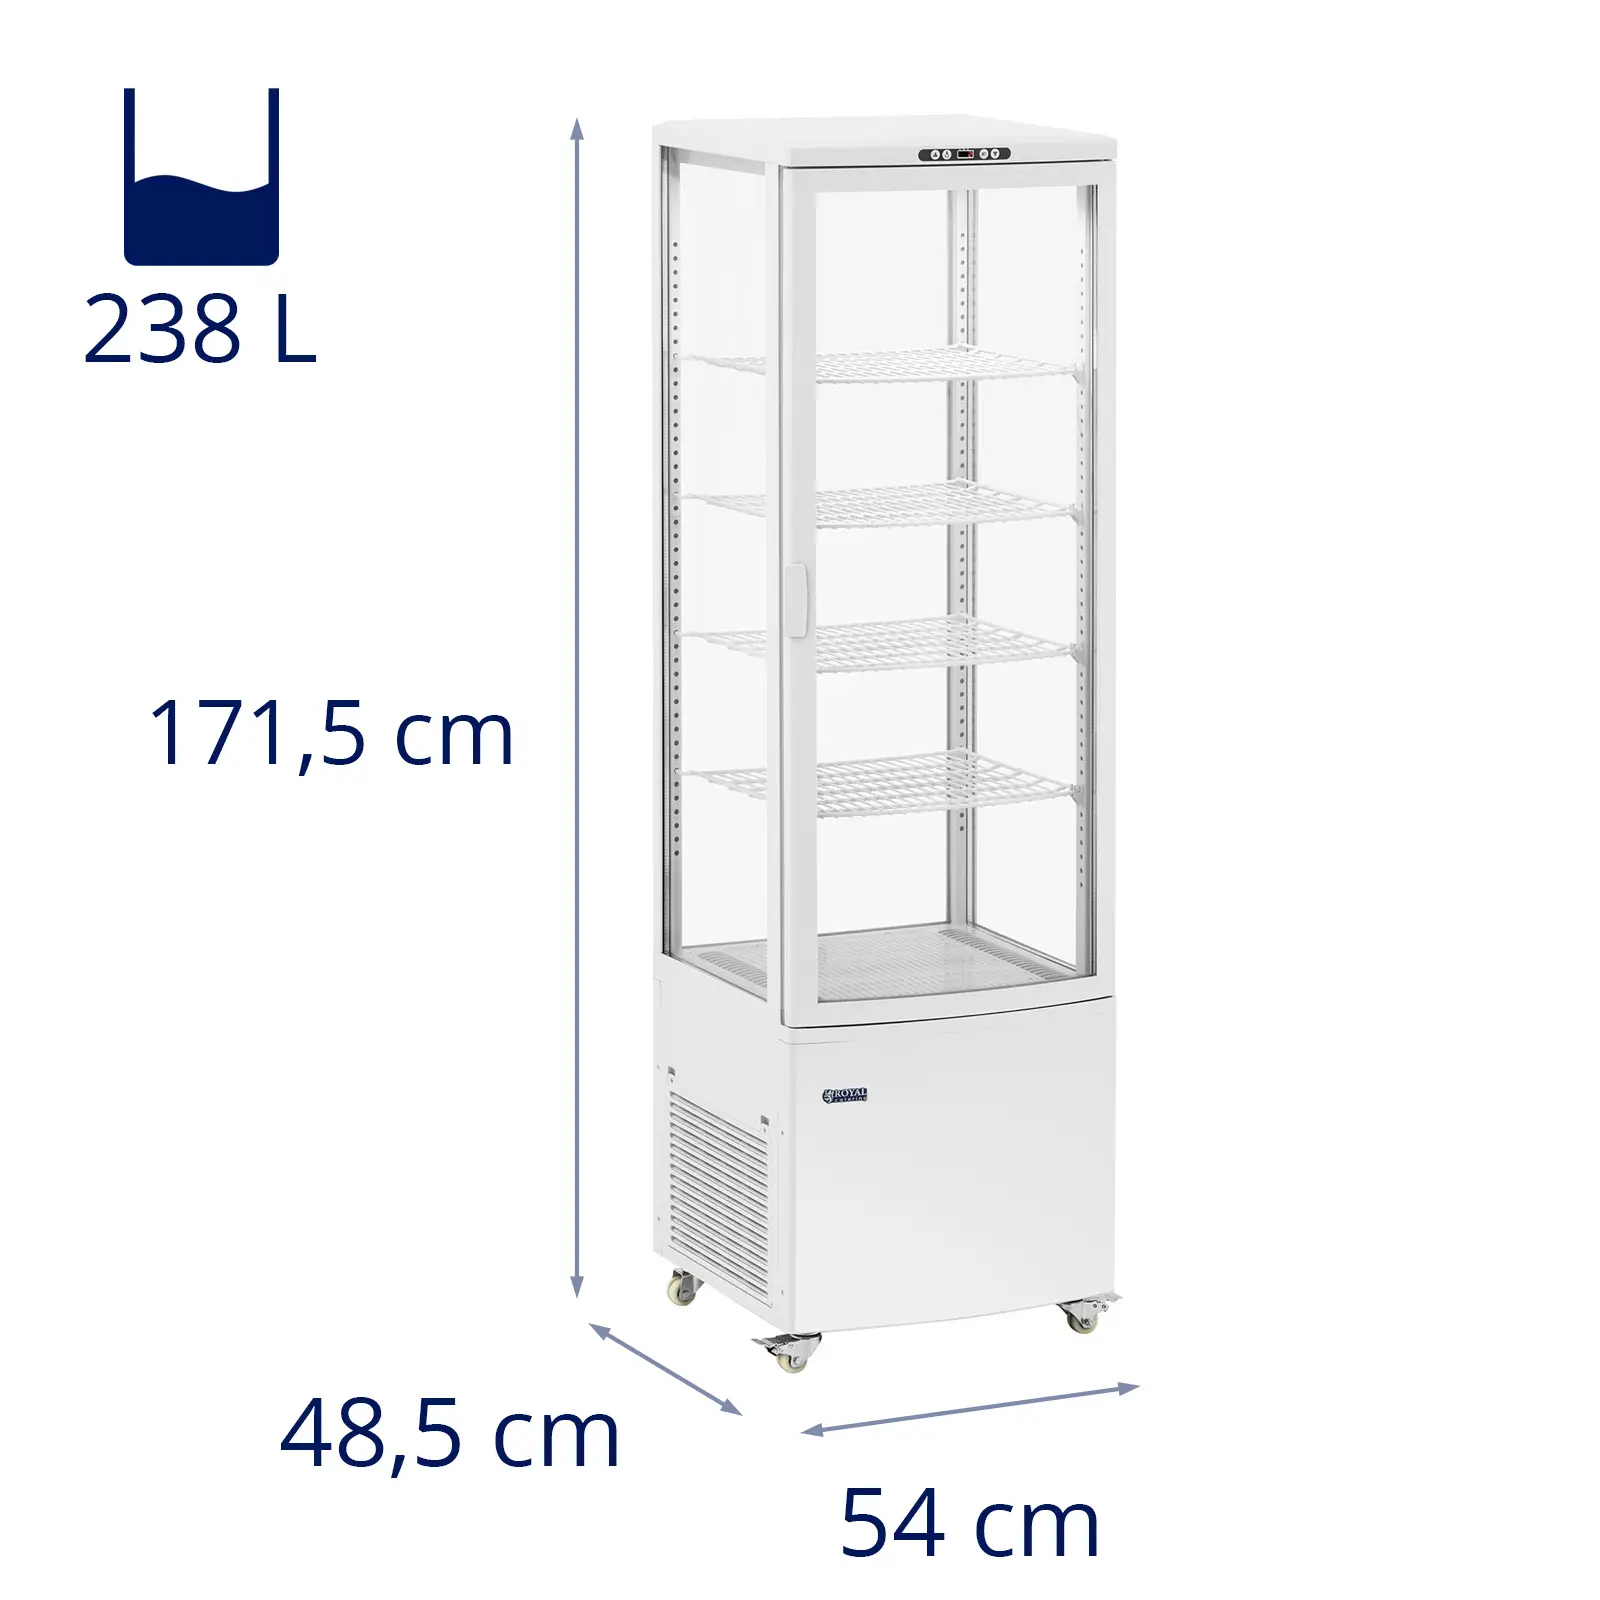 Refrigerated Display Case - 238 L - 5 levels - white - 4 wheels 